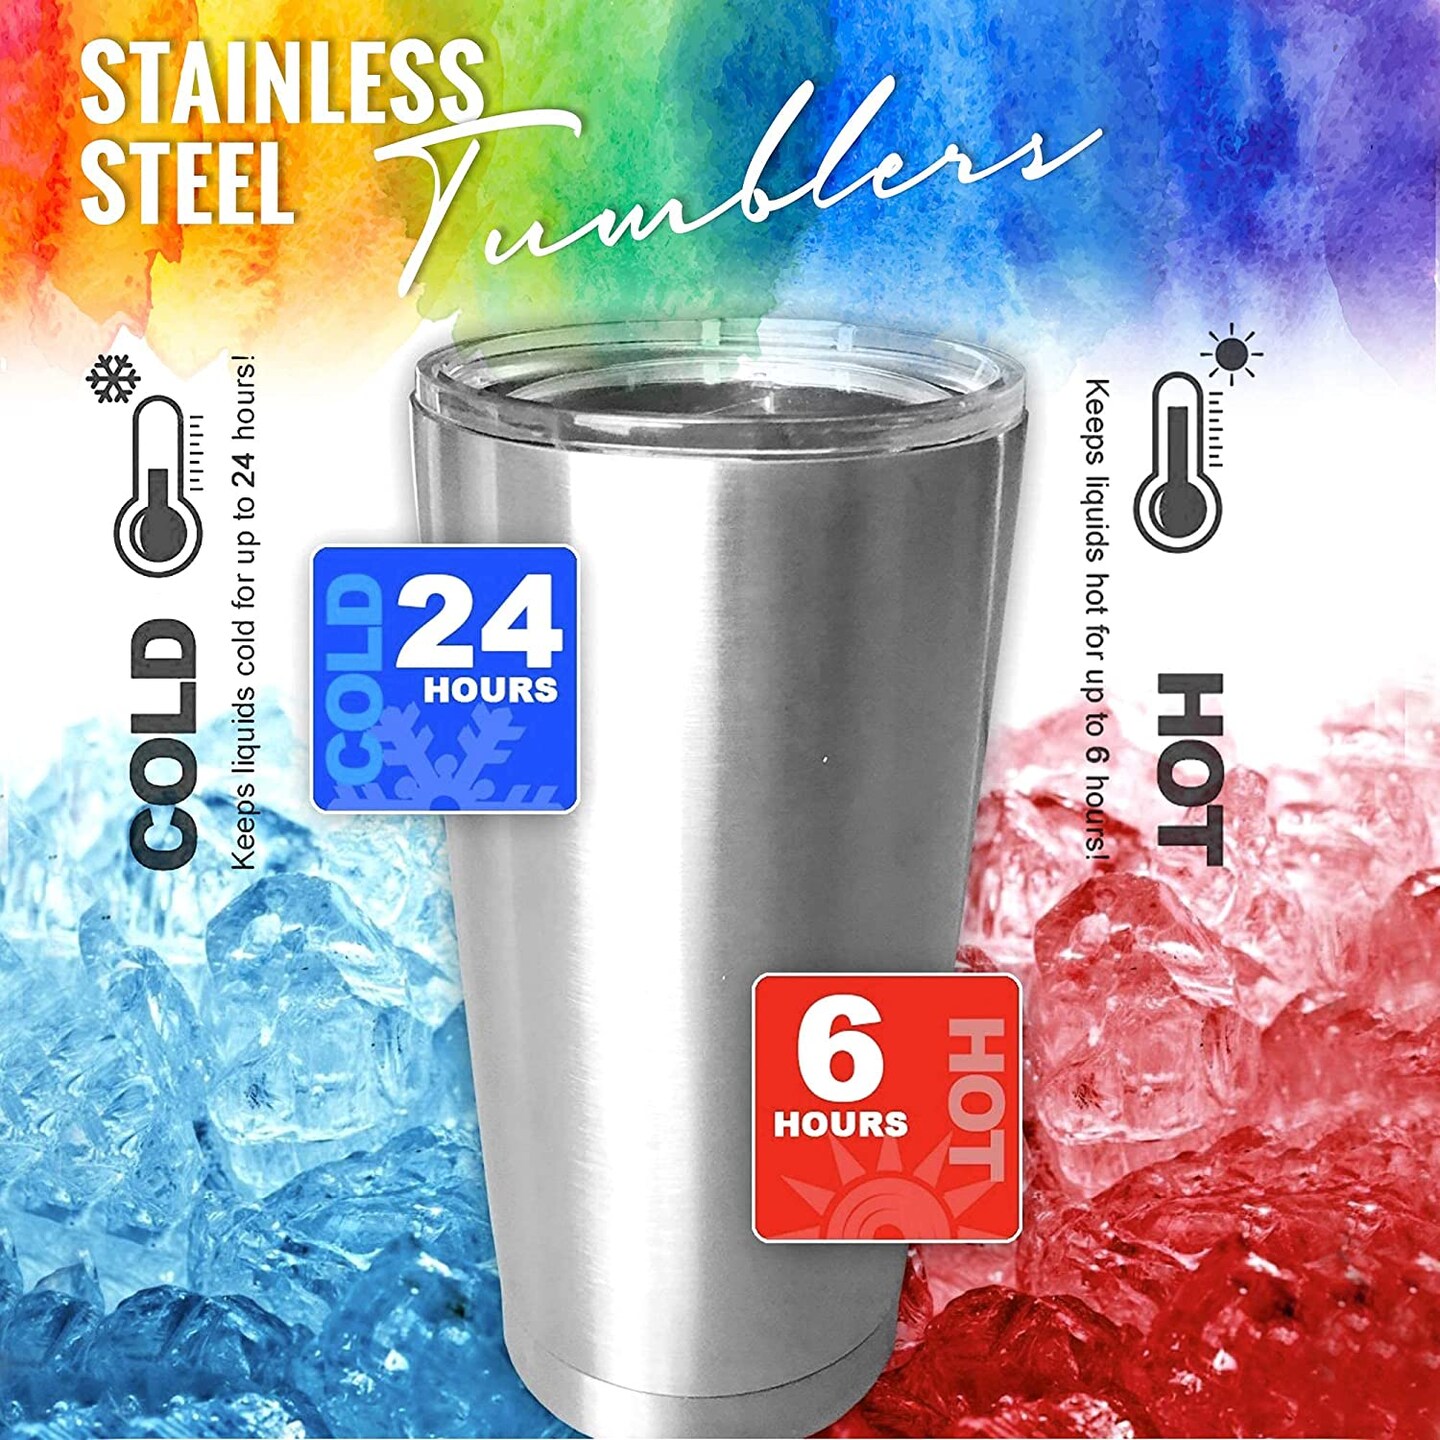 Pixiss Stainless Steel Tumblers Bulk 25-Pack 20oz Double Wall